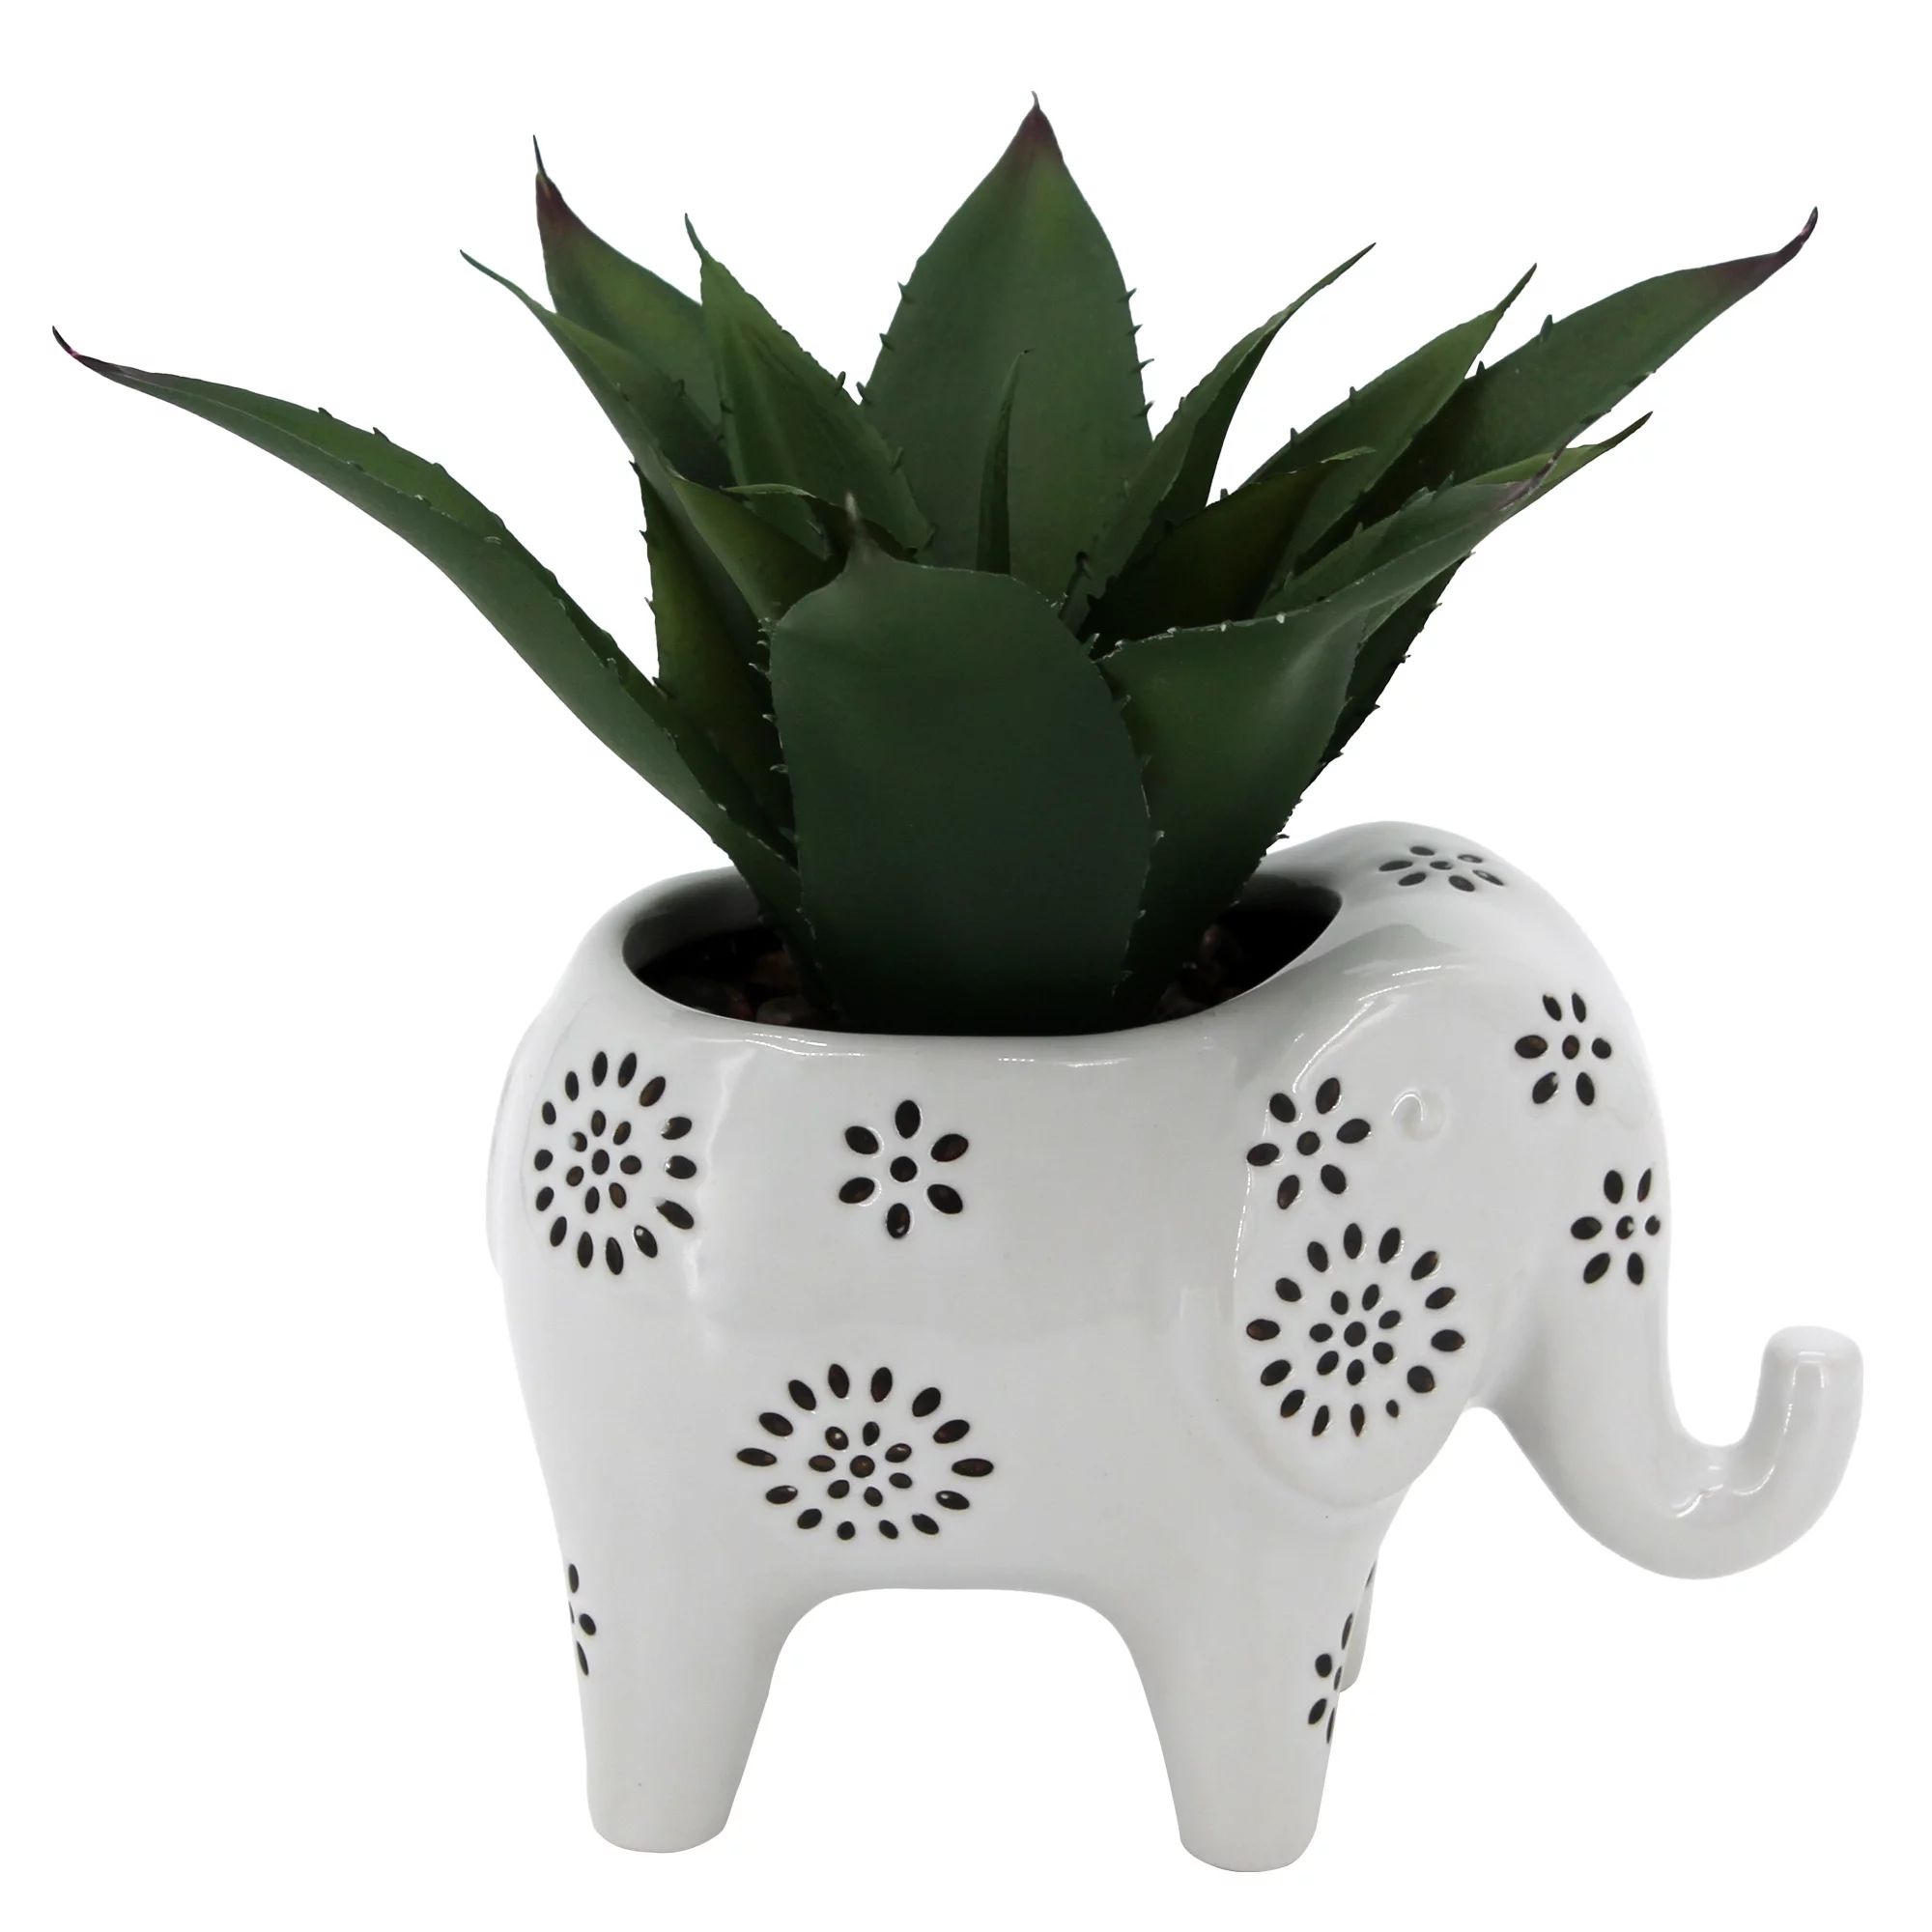 Mainstays 7.5" Artificial Agave Plant in White Ceramic Elephant Planter | Walmart (US)